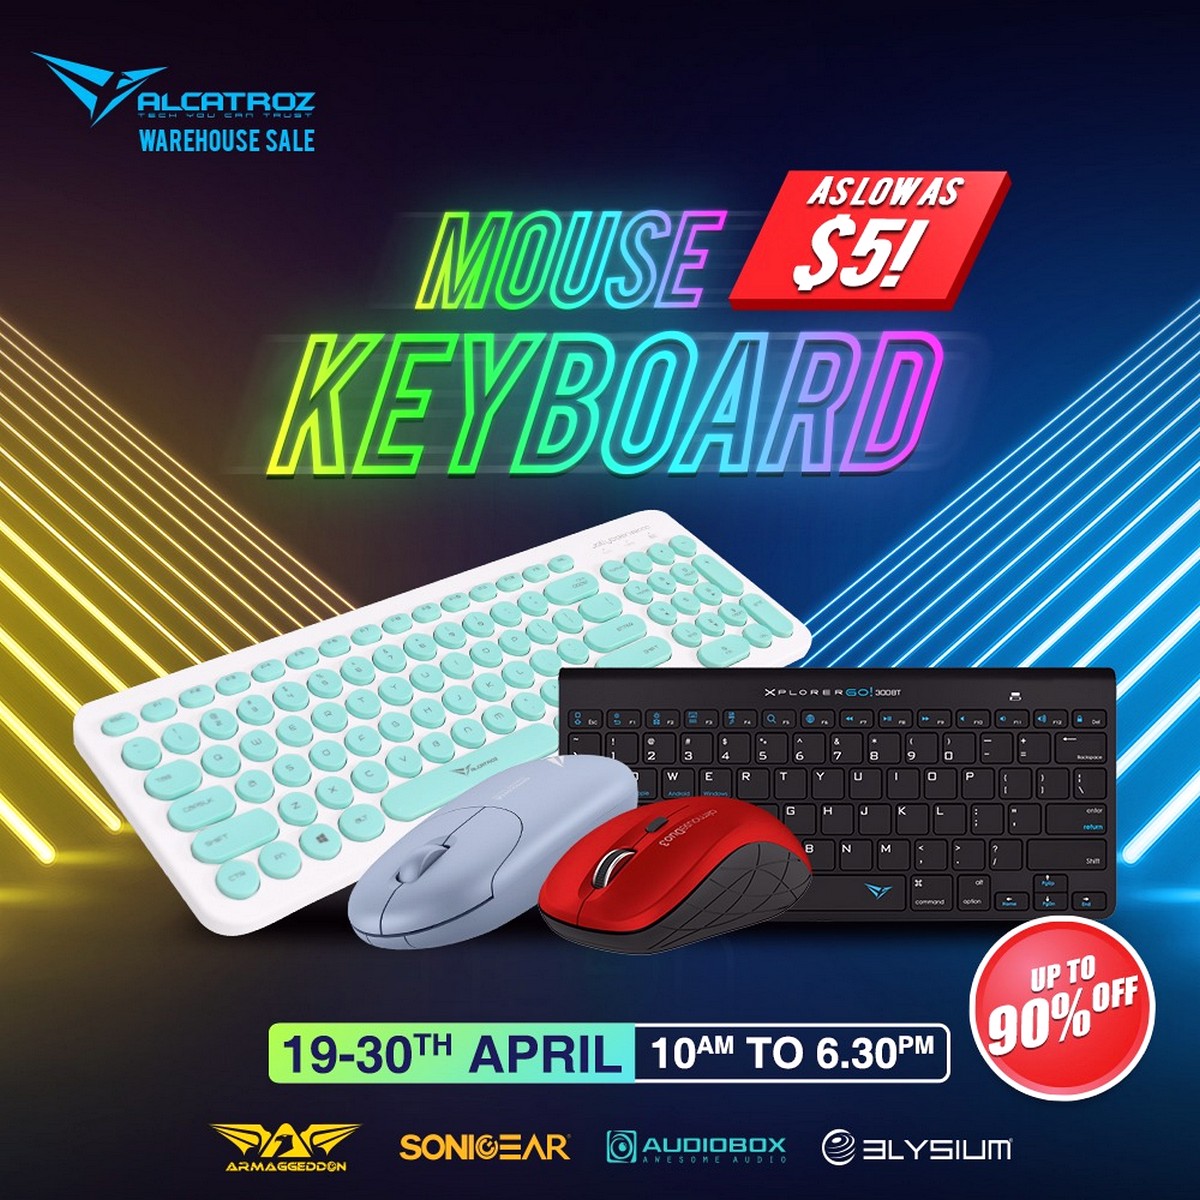 Leapfrog-Warehouse-Sale-2021-Singapore-Clearance-Armaggeddon-SonicGear-Audiobox-Alcatraoz-Elysium-5 19-30 Apr 2021: Armaggeddon, SonicGear, Audiobox, Alcatroz, Elysium Warehouse Sale Up to 90% OFF at Kallang Sector